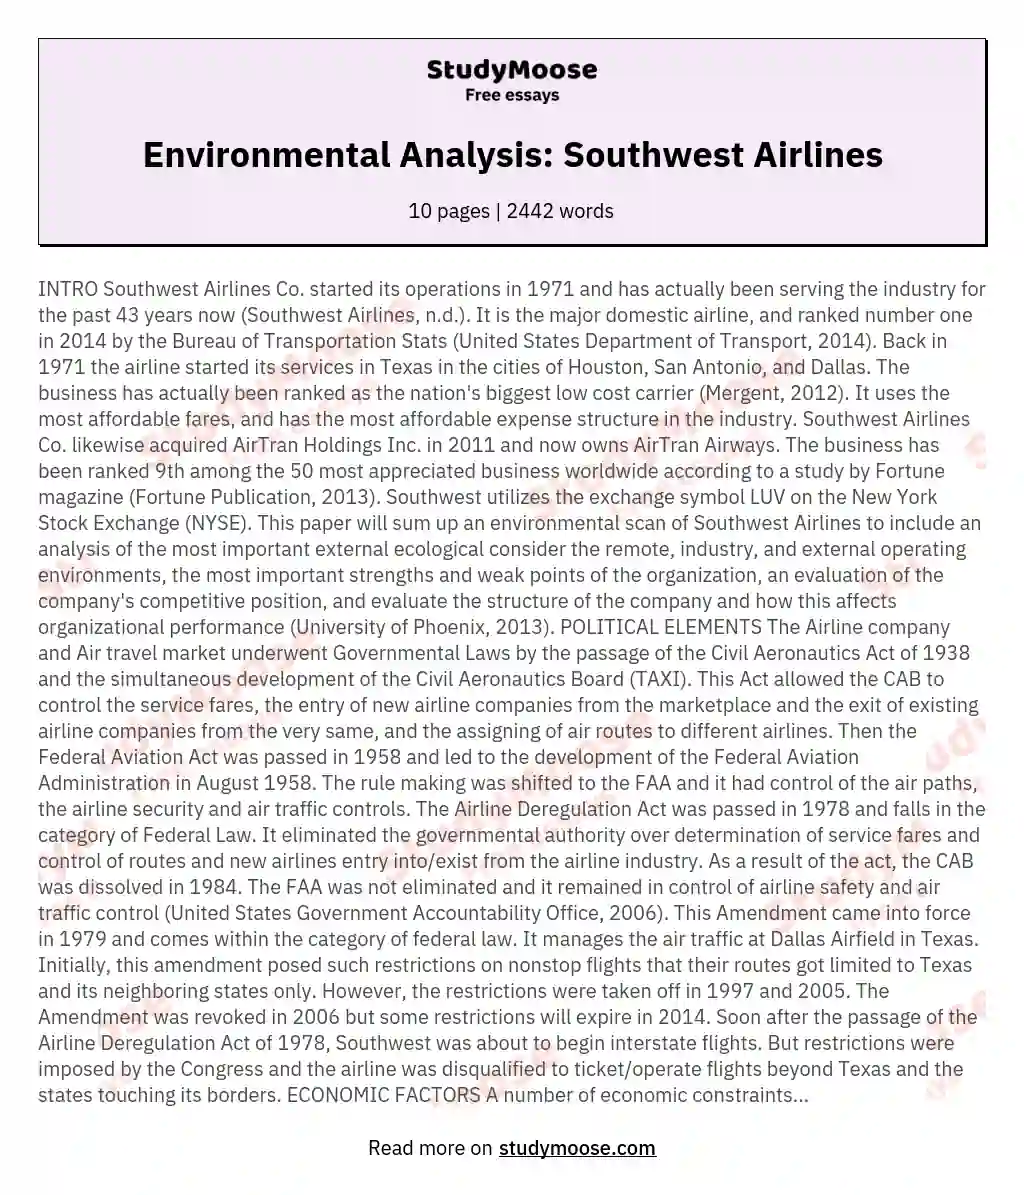 Environmental Analysis: Southwest Airlines